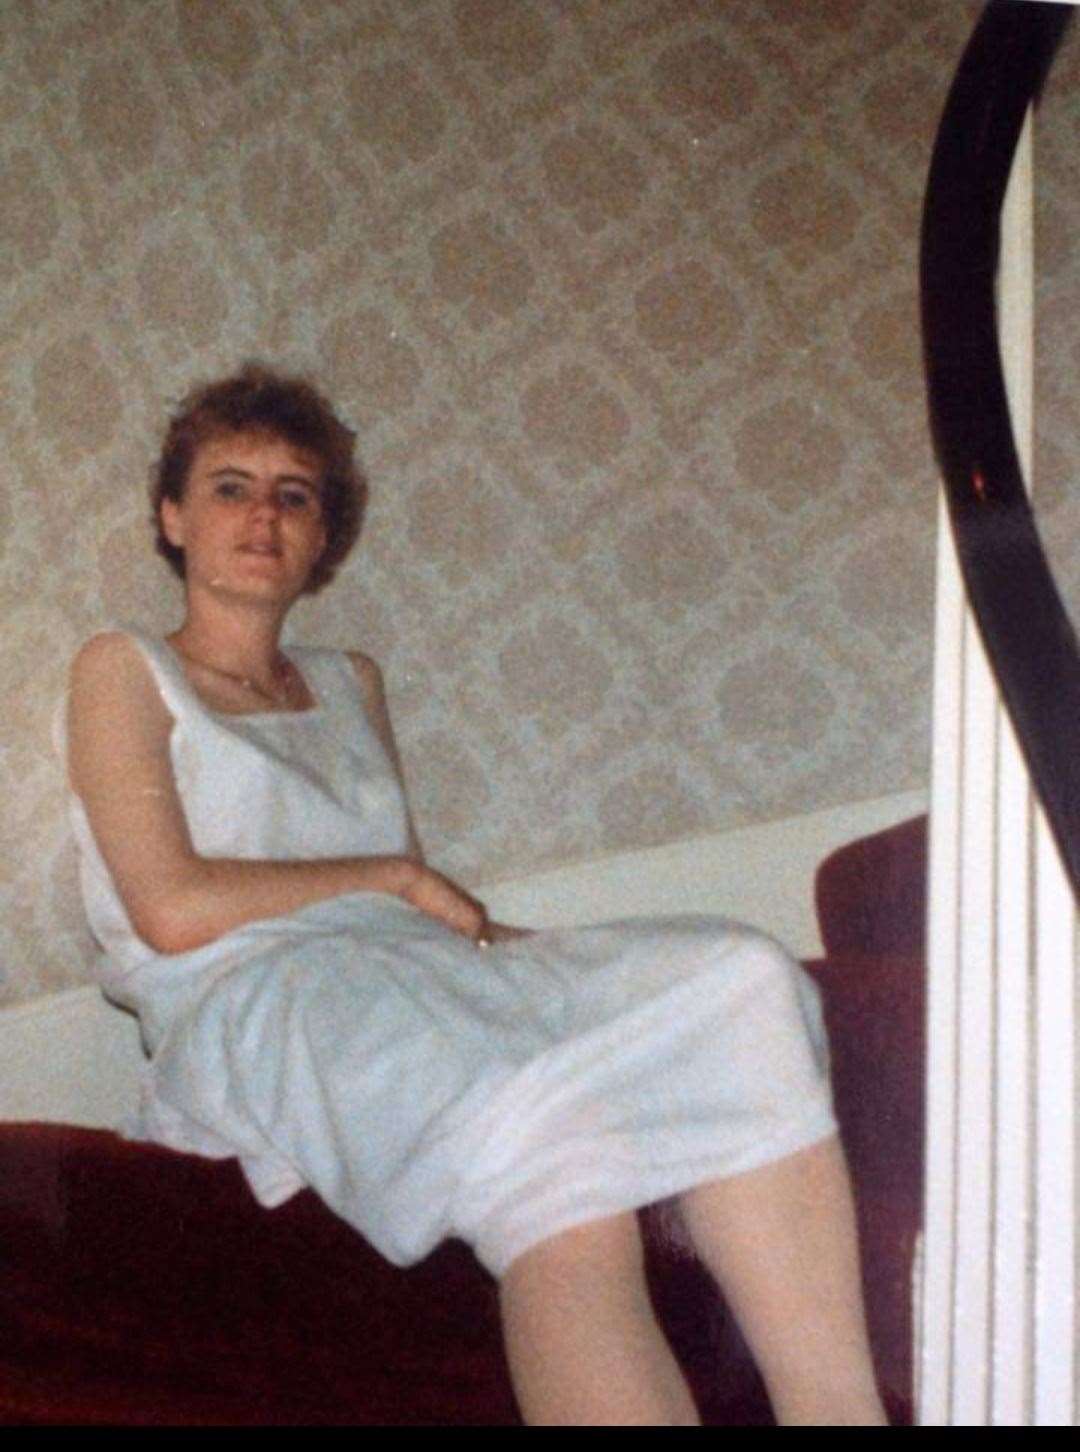 Heidi Hodges as a teenager in the care home where she was raised